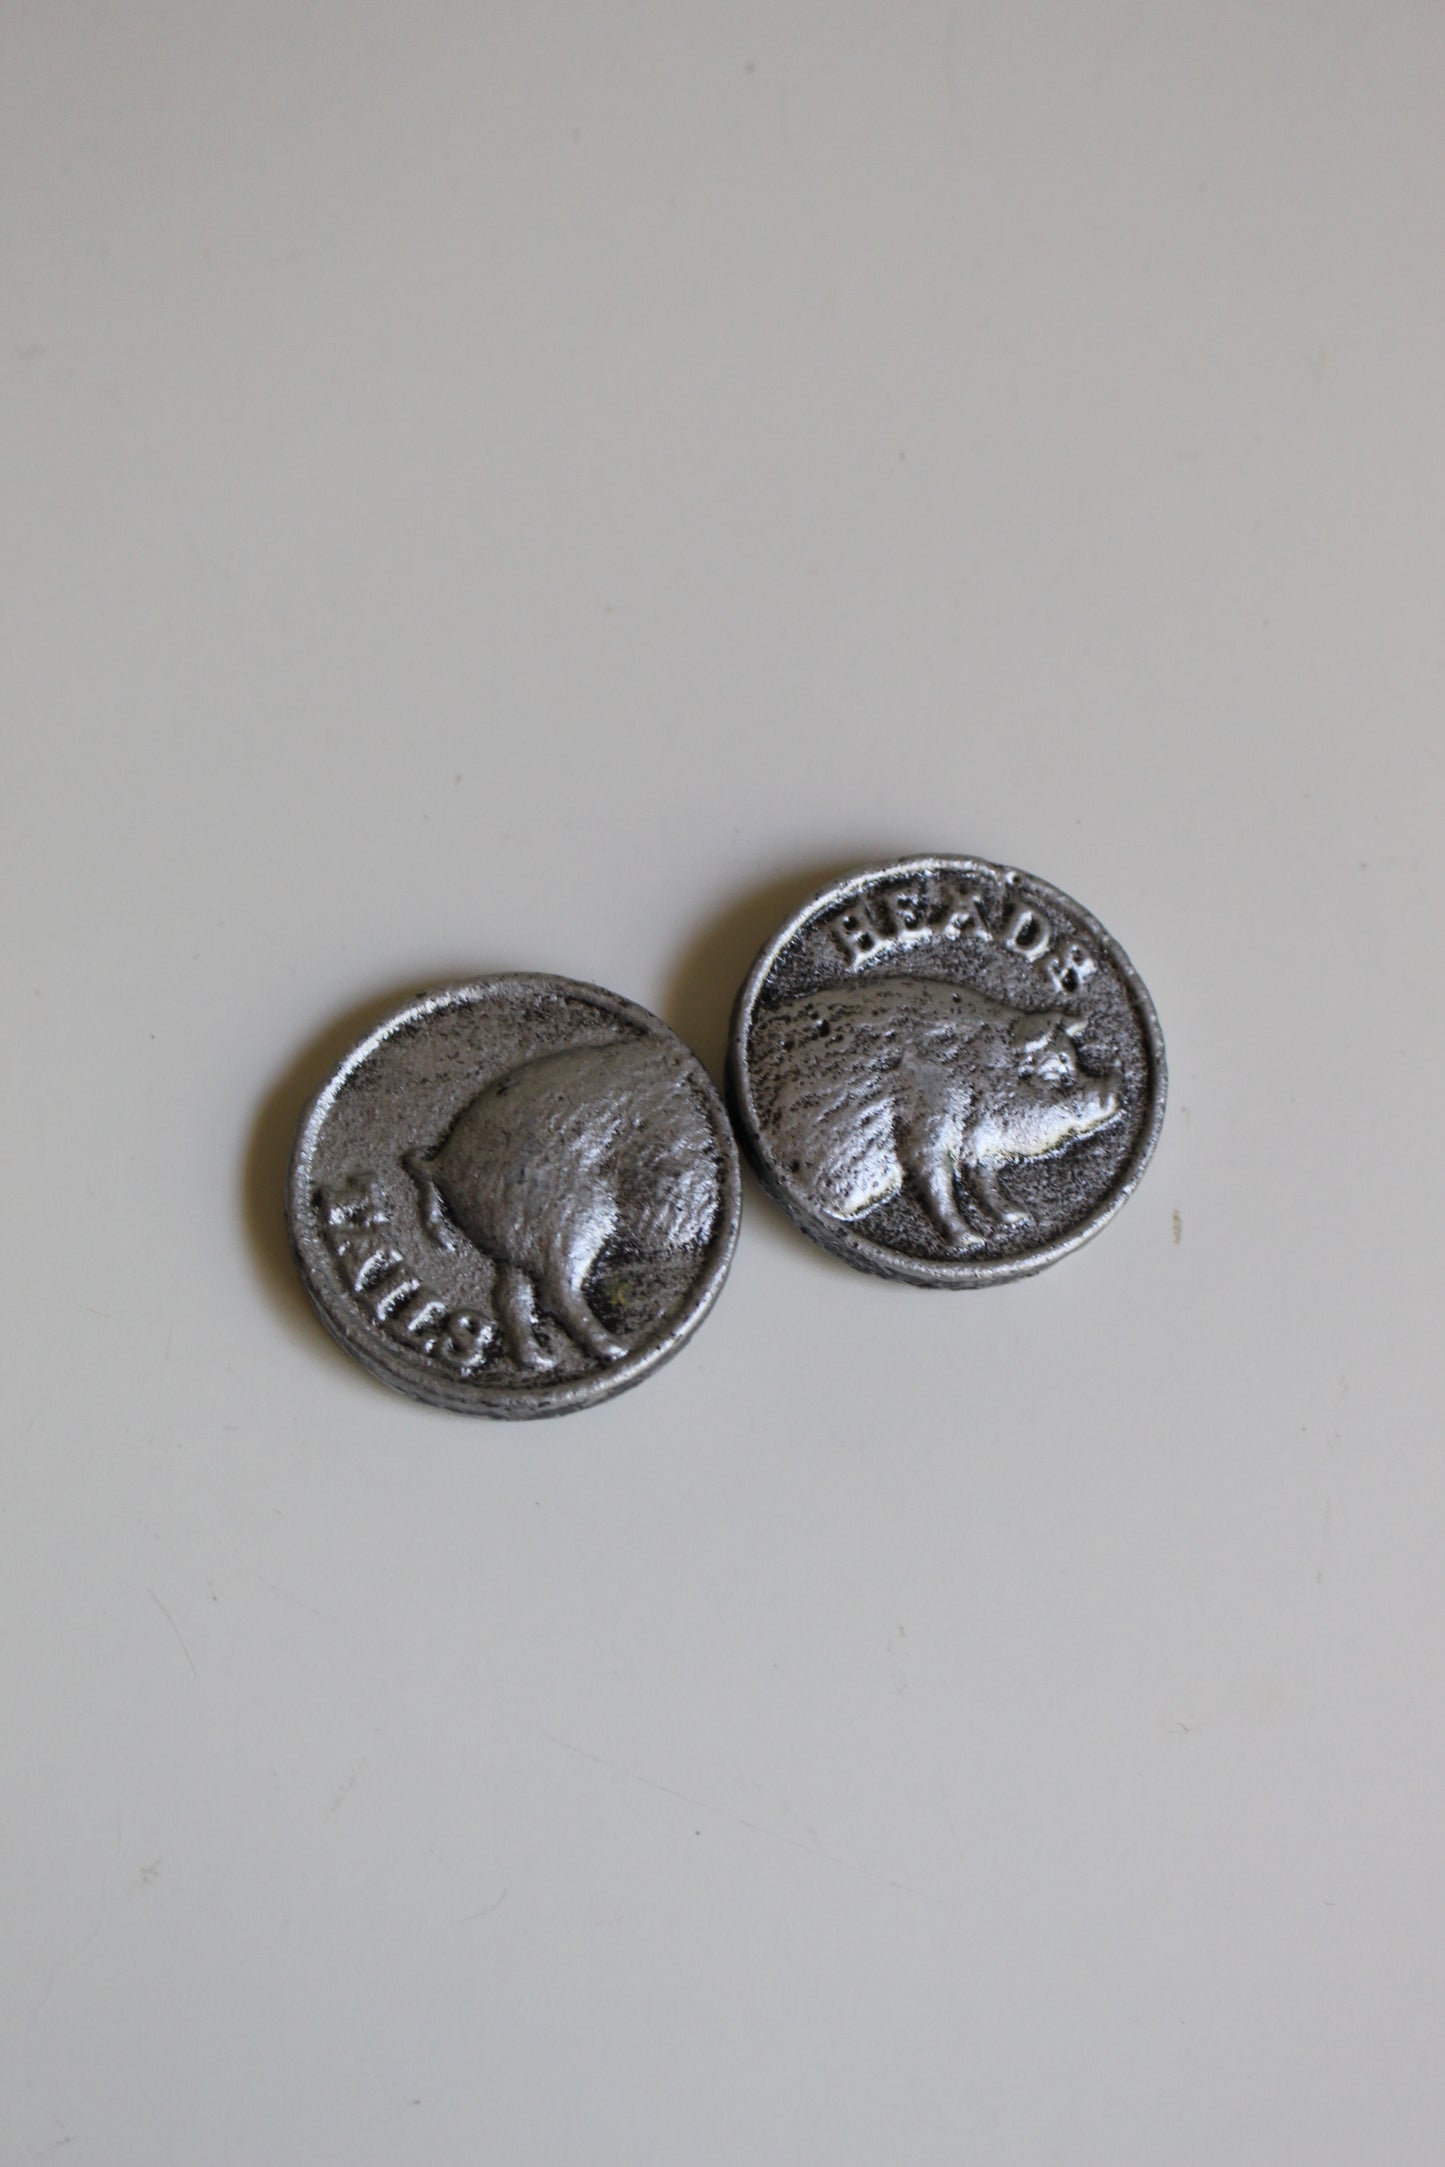 Heads or Tails Coin